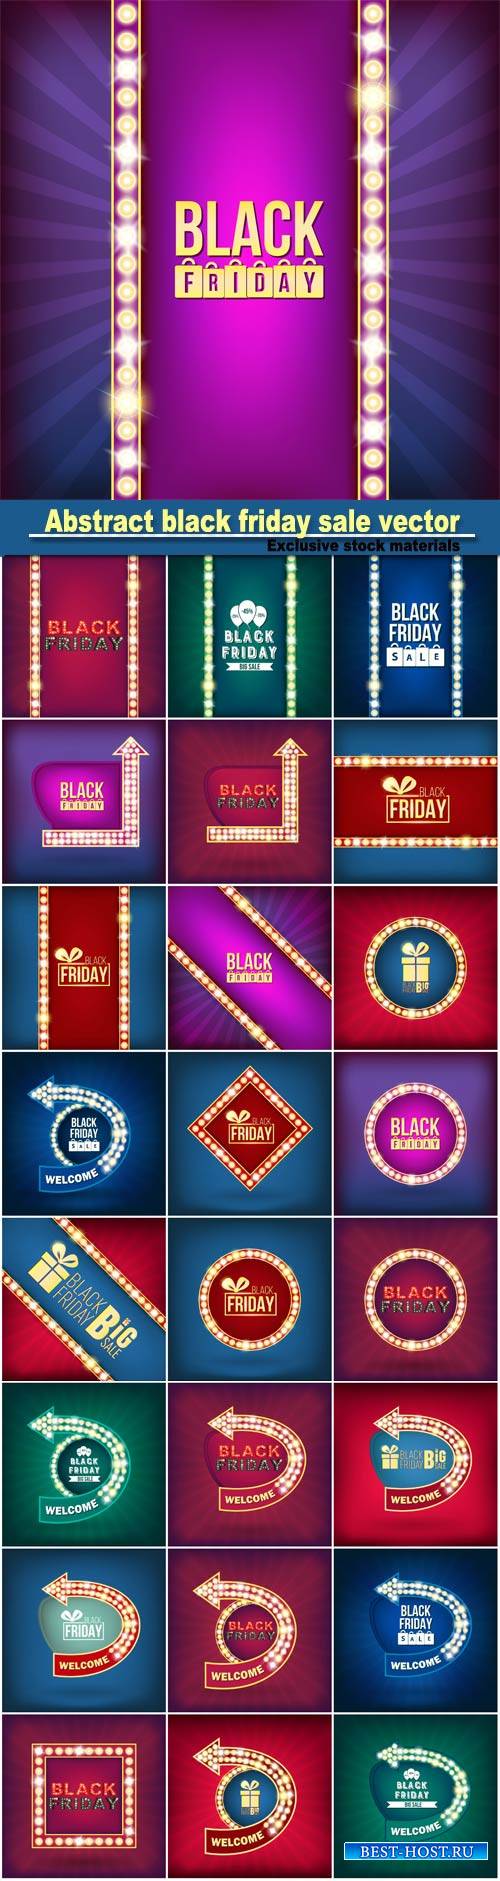 Abstract black friday sale vector background